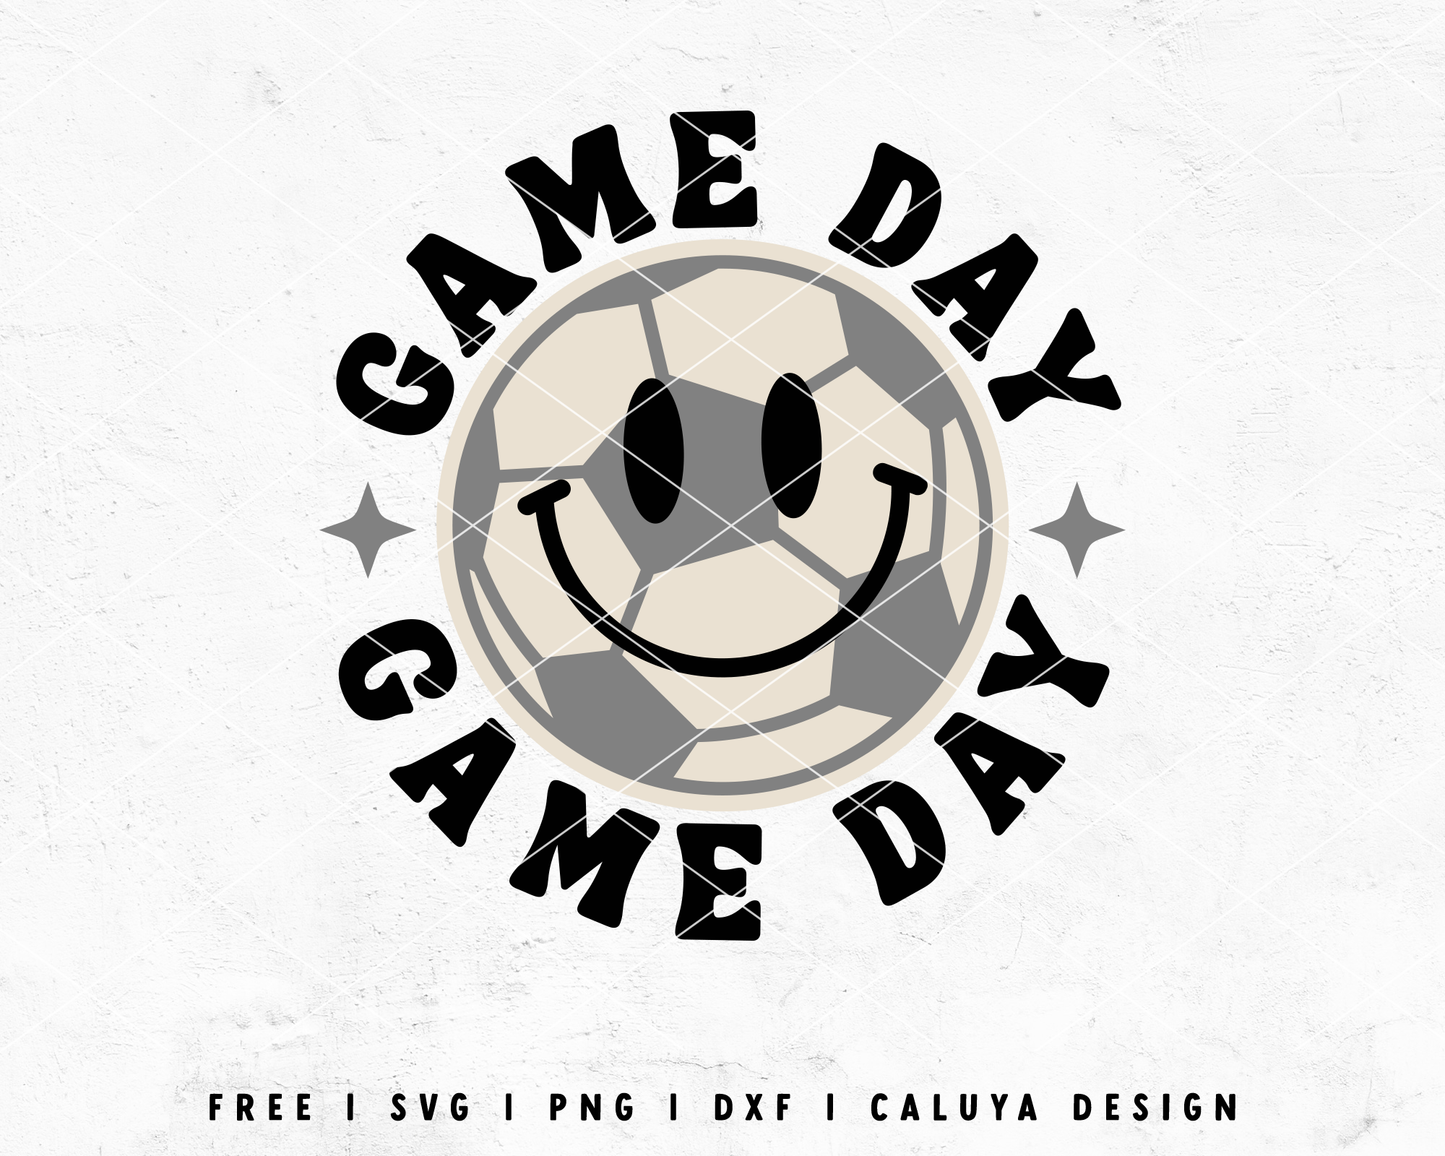 FREE Soccer SVG | Geme Day SVG Cut File for Cricut, Cameo Silhouette | Free SVG Cut File